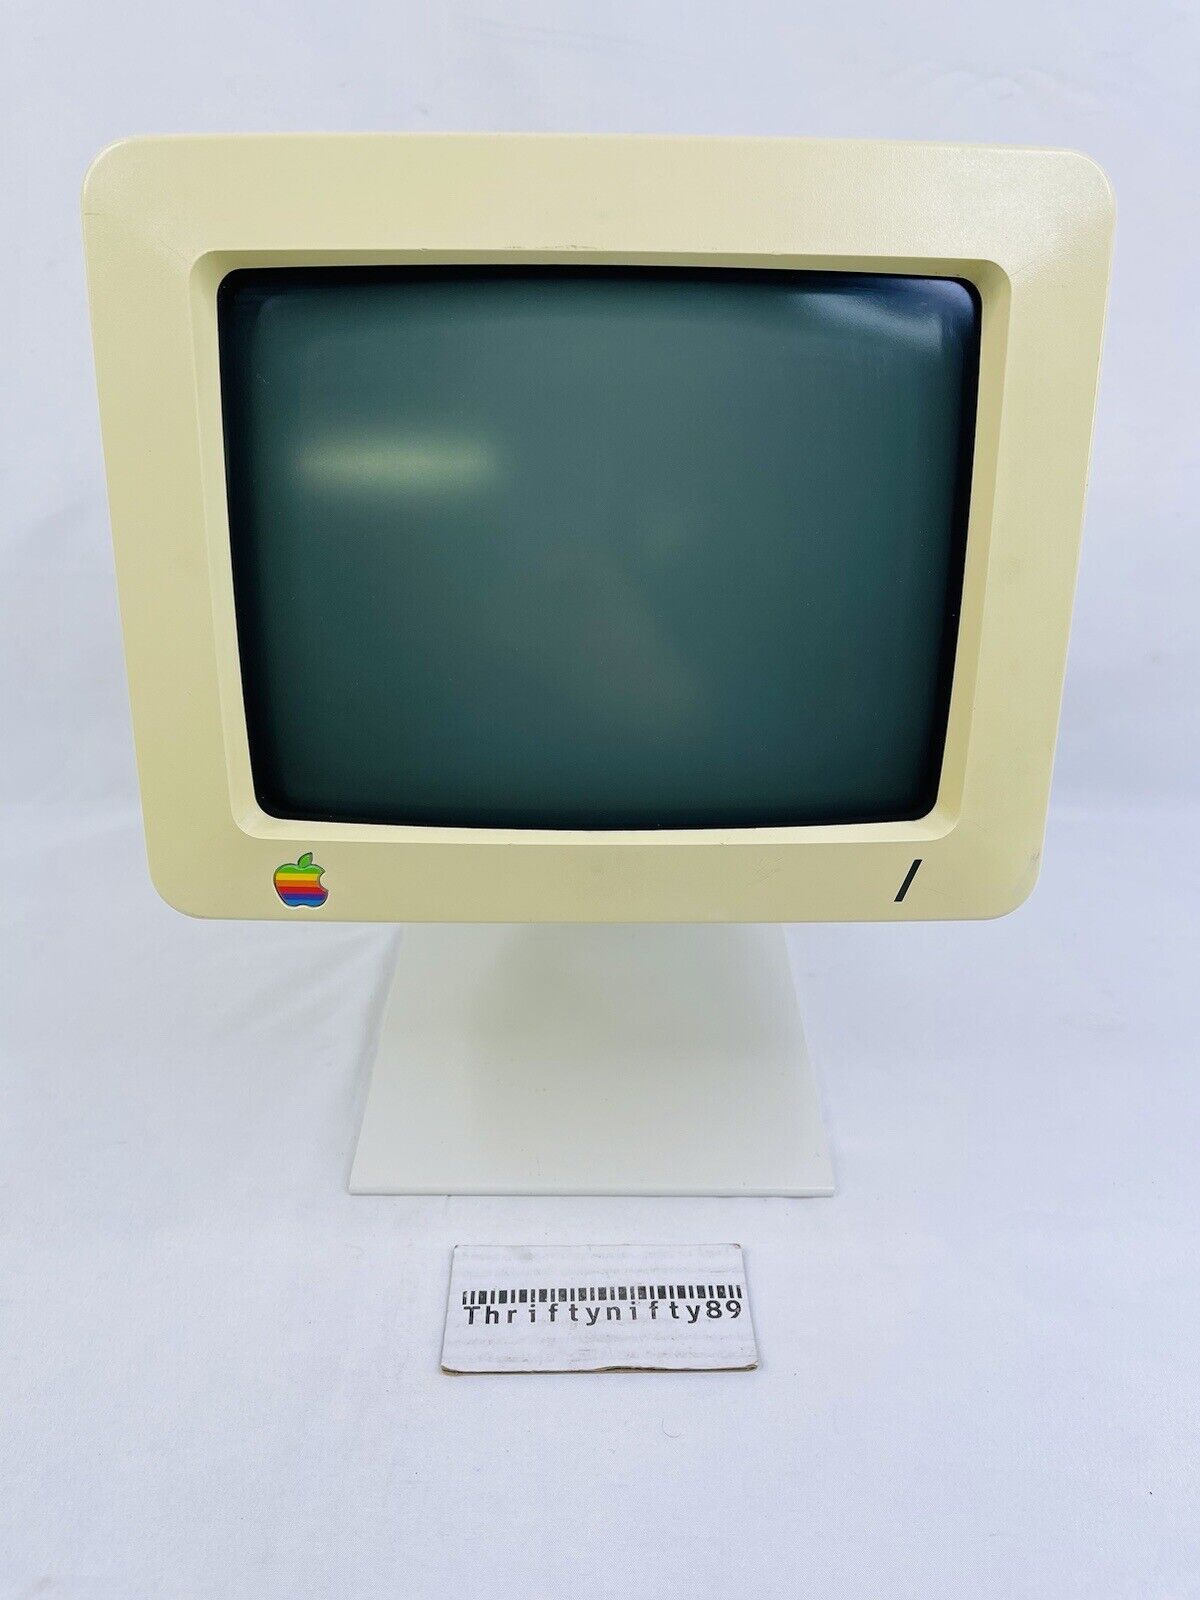 VINTAGE APPLE COMPUTER MONITOR MODEL G090H CRT  WITH APPLE STAND POWERS ON.